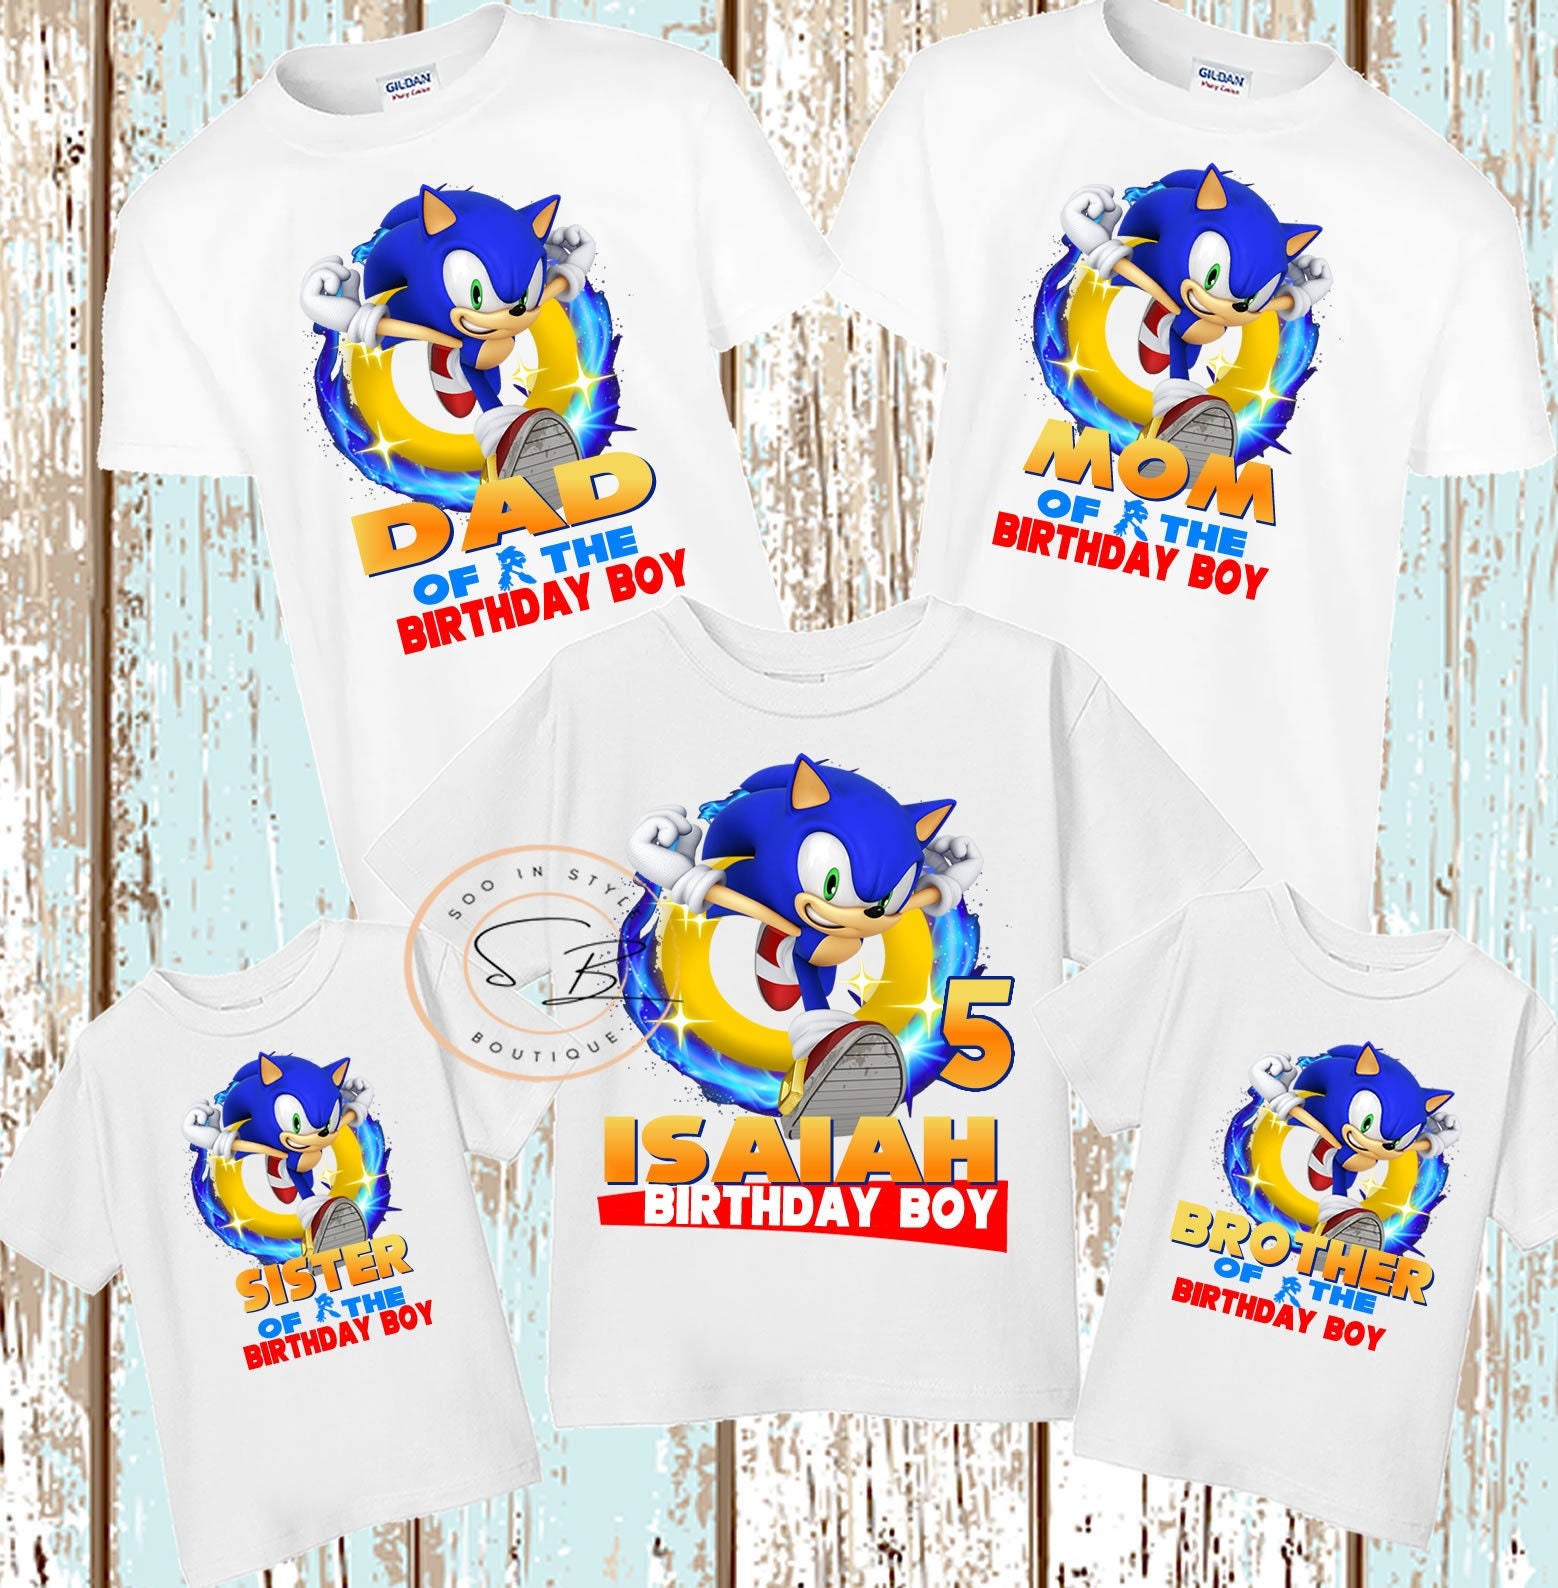 SparkleMe Shoes - Custom sonic and shadow hedgehog, t-shirt and shoe combo,  for birthday twin boys! SO COOL!☺️ Order YOURS today!󾮗🏽 All items are  made to order! Inbox for details! 󾔗󾔗󾔗